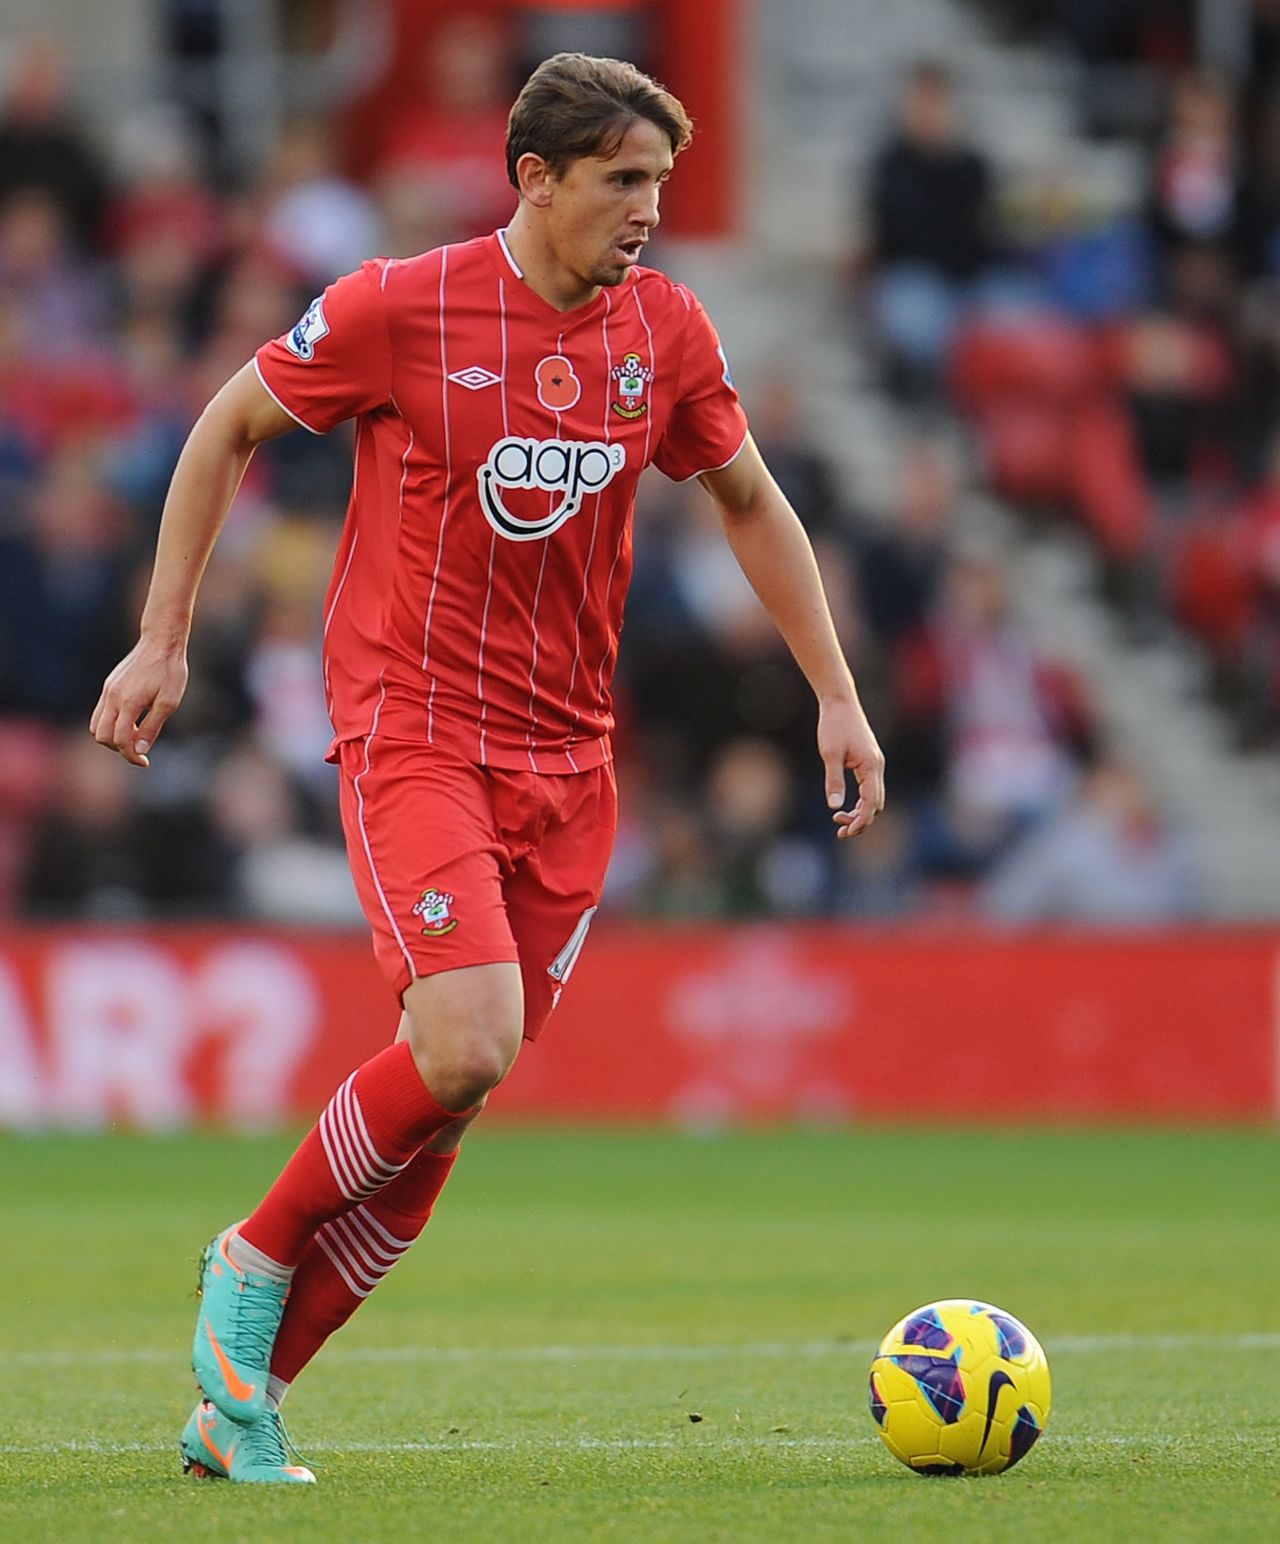 Premier League newcomers Southampton spent the least on agents' fees. The Saints spent most of its budget on Gaston Ramirez from Bologna, who cost just over $19 million.